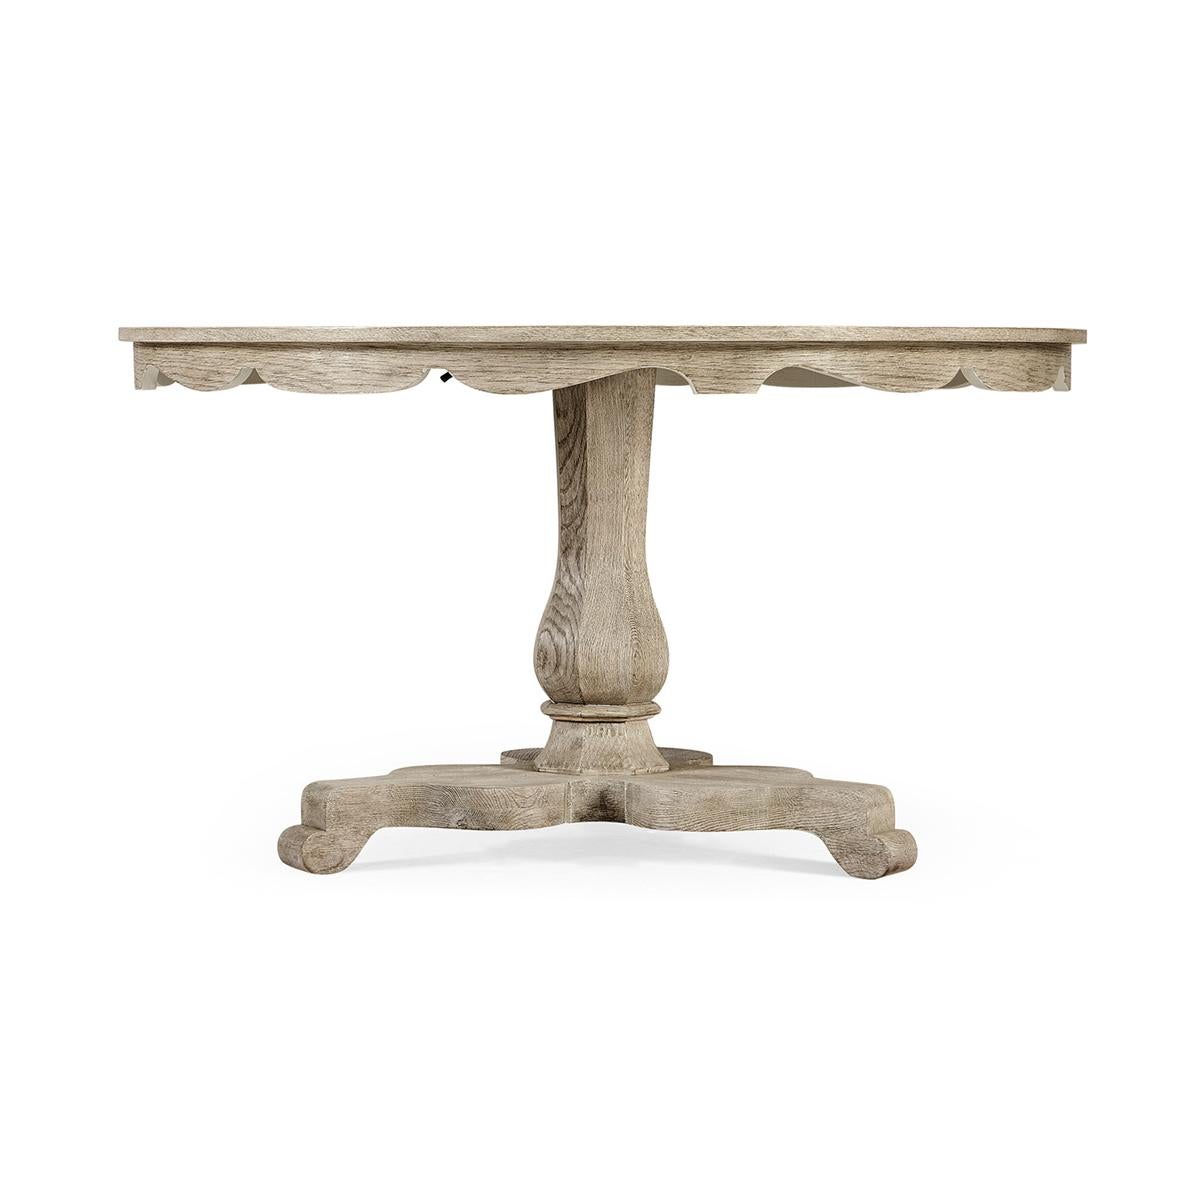 Greyed Oak center or breakfast table with a scalloped apron, on a tripartite baluster form pedestal base.

Dimensions: 54